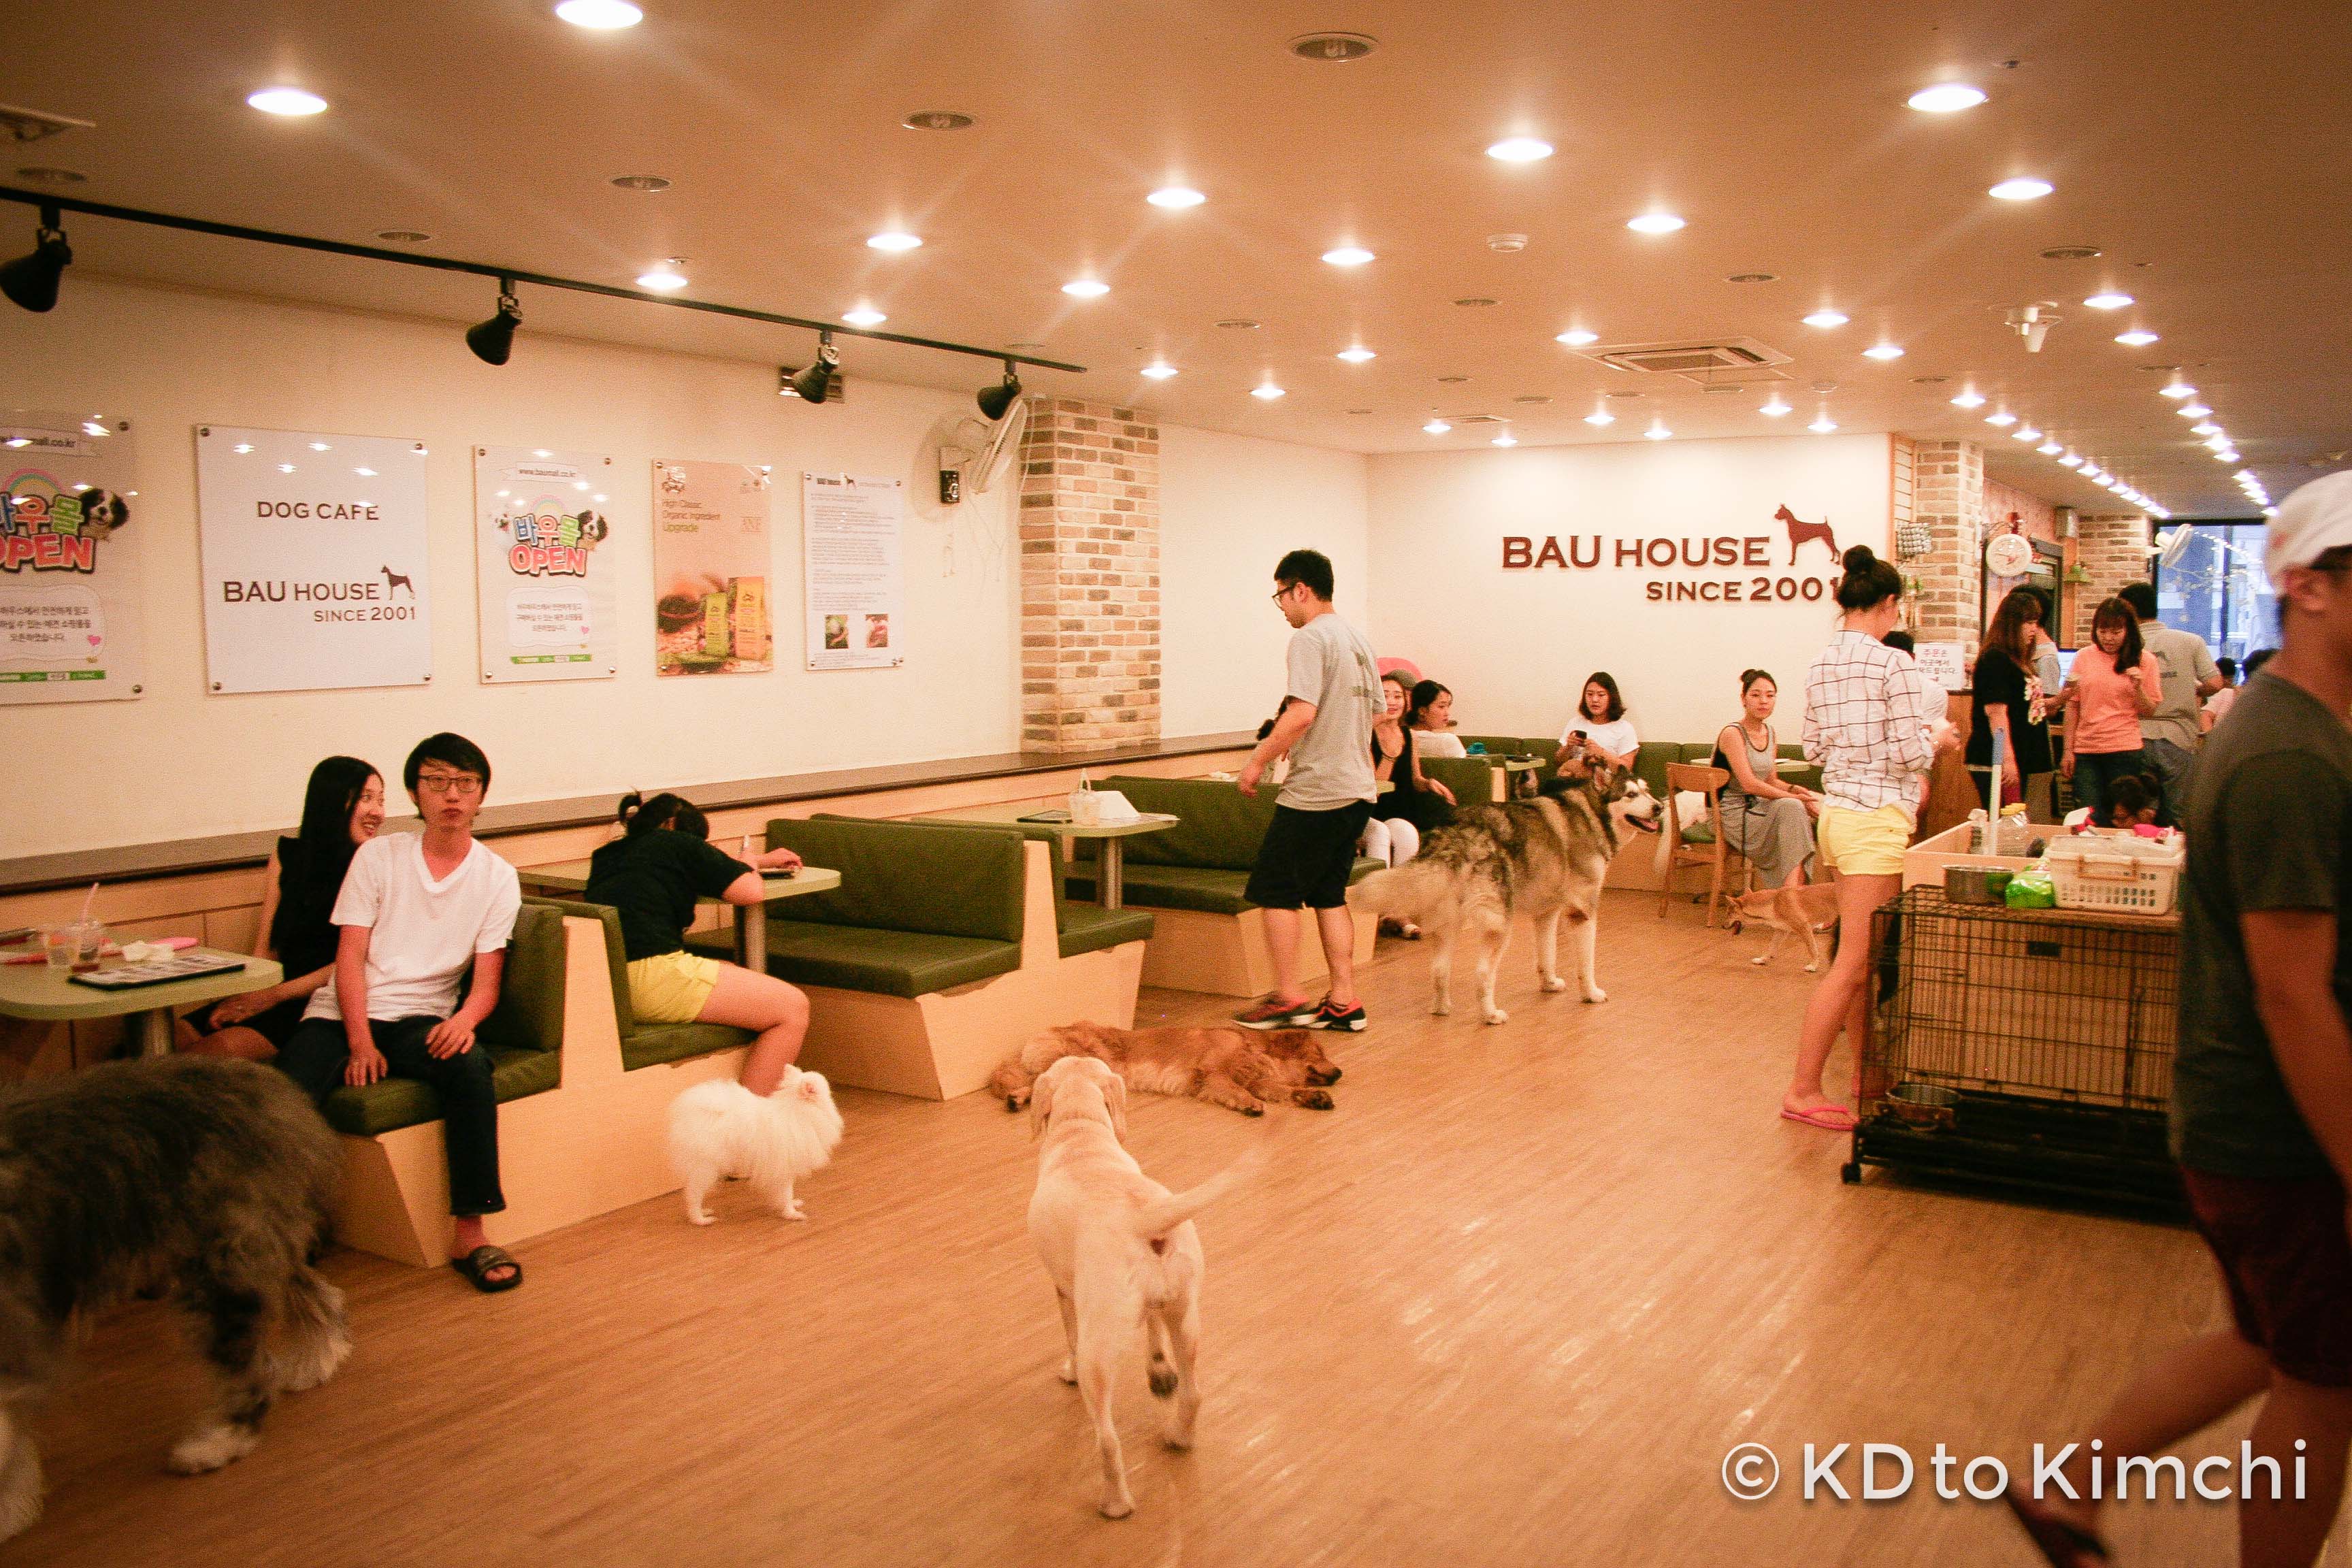 Checking out BAU HOUSE a Korean  dog  caf  From KD to Kimchi